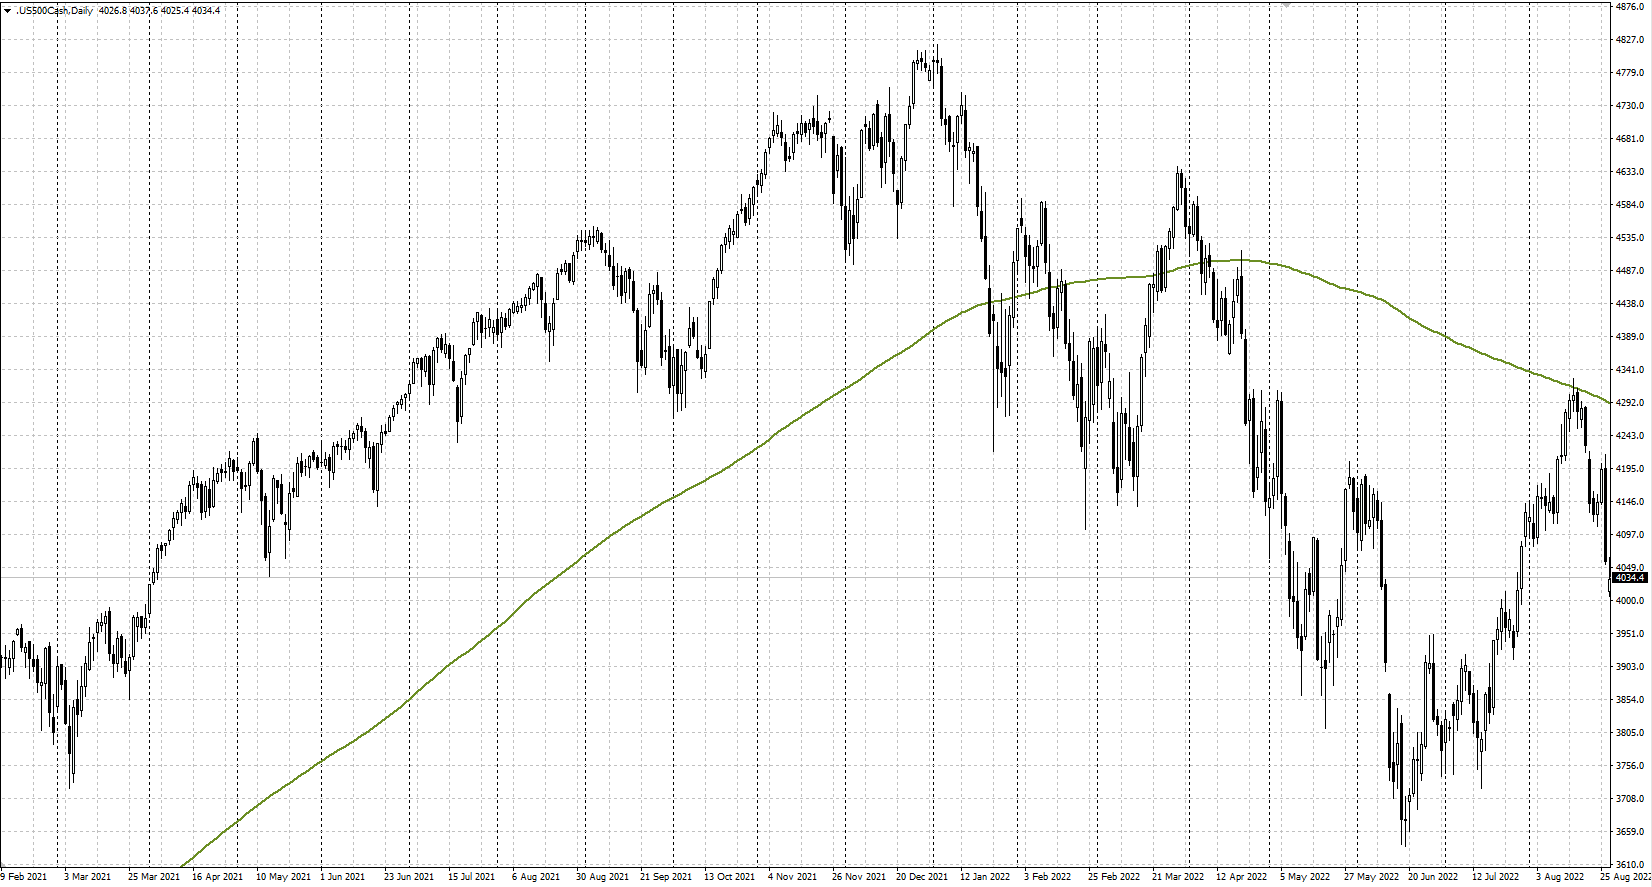 200-day Moving Average on the S&P 500 Index price chart